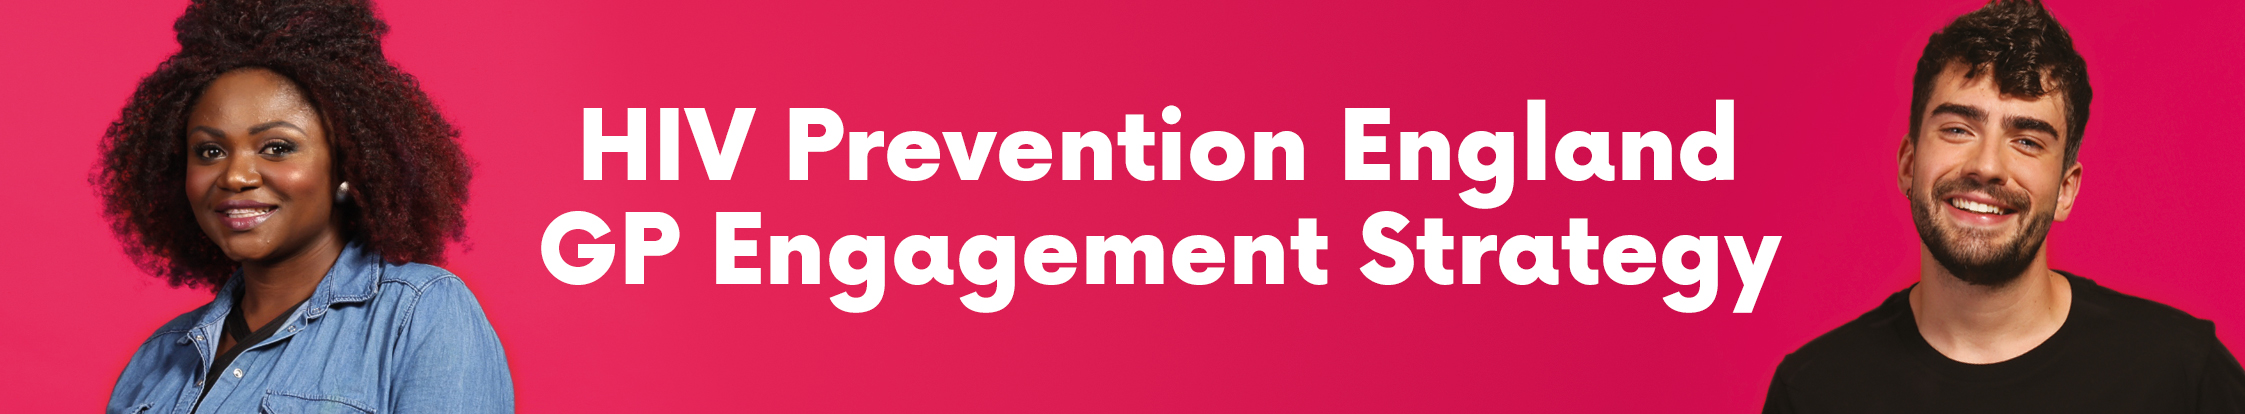 HIV Prevention England GP Engagement Strategy banner